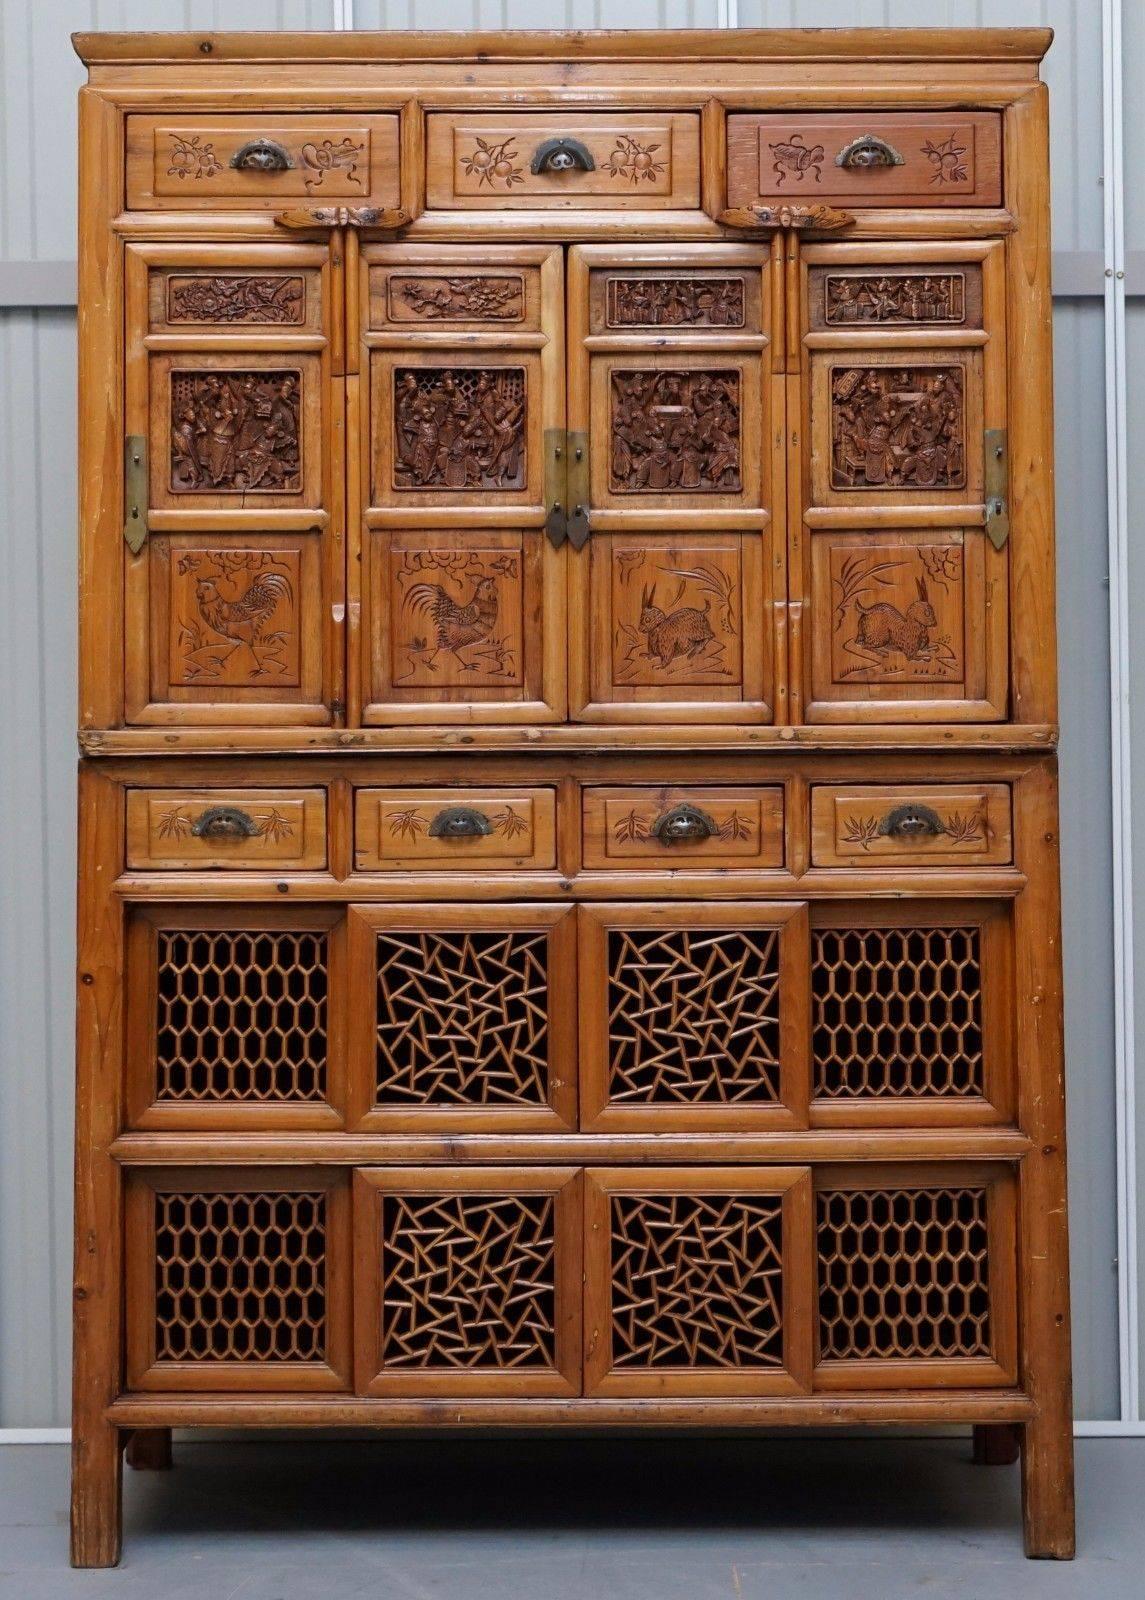 Wimbledon-Furniture

Wimbledon-Furniture is delighted to offer for sale this lovely original hand carved solid teak 100+ year old Chinese chicken coup cupboard with paperwork

Please note the delivery fee listed is just a guide, for an accurate